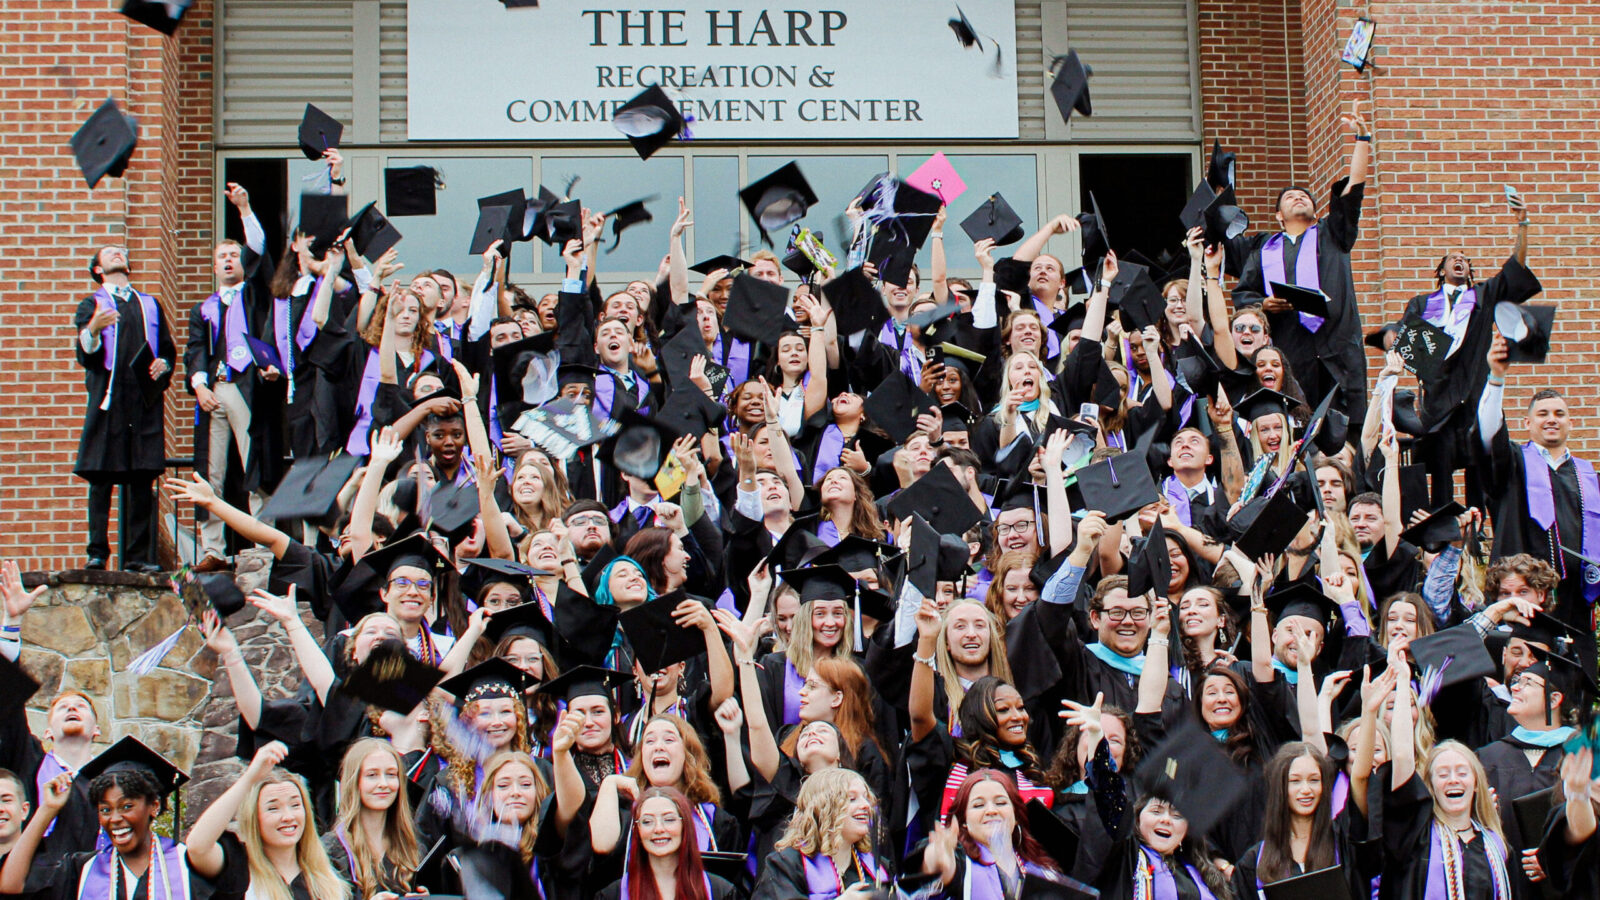 Graduates throwing caps in front of The Harp